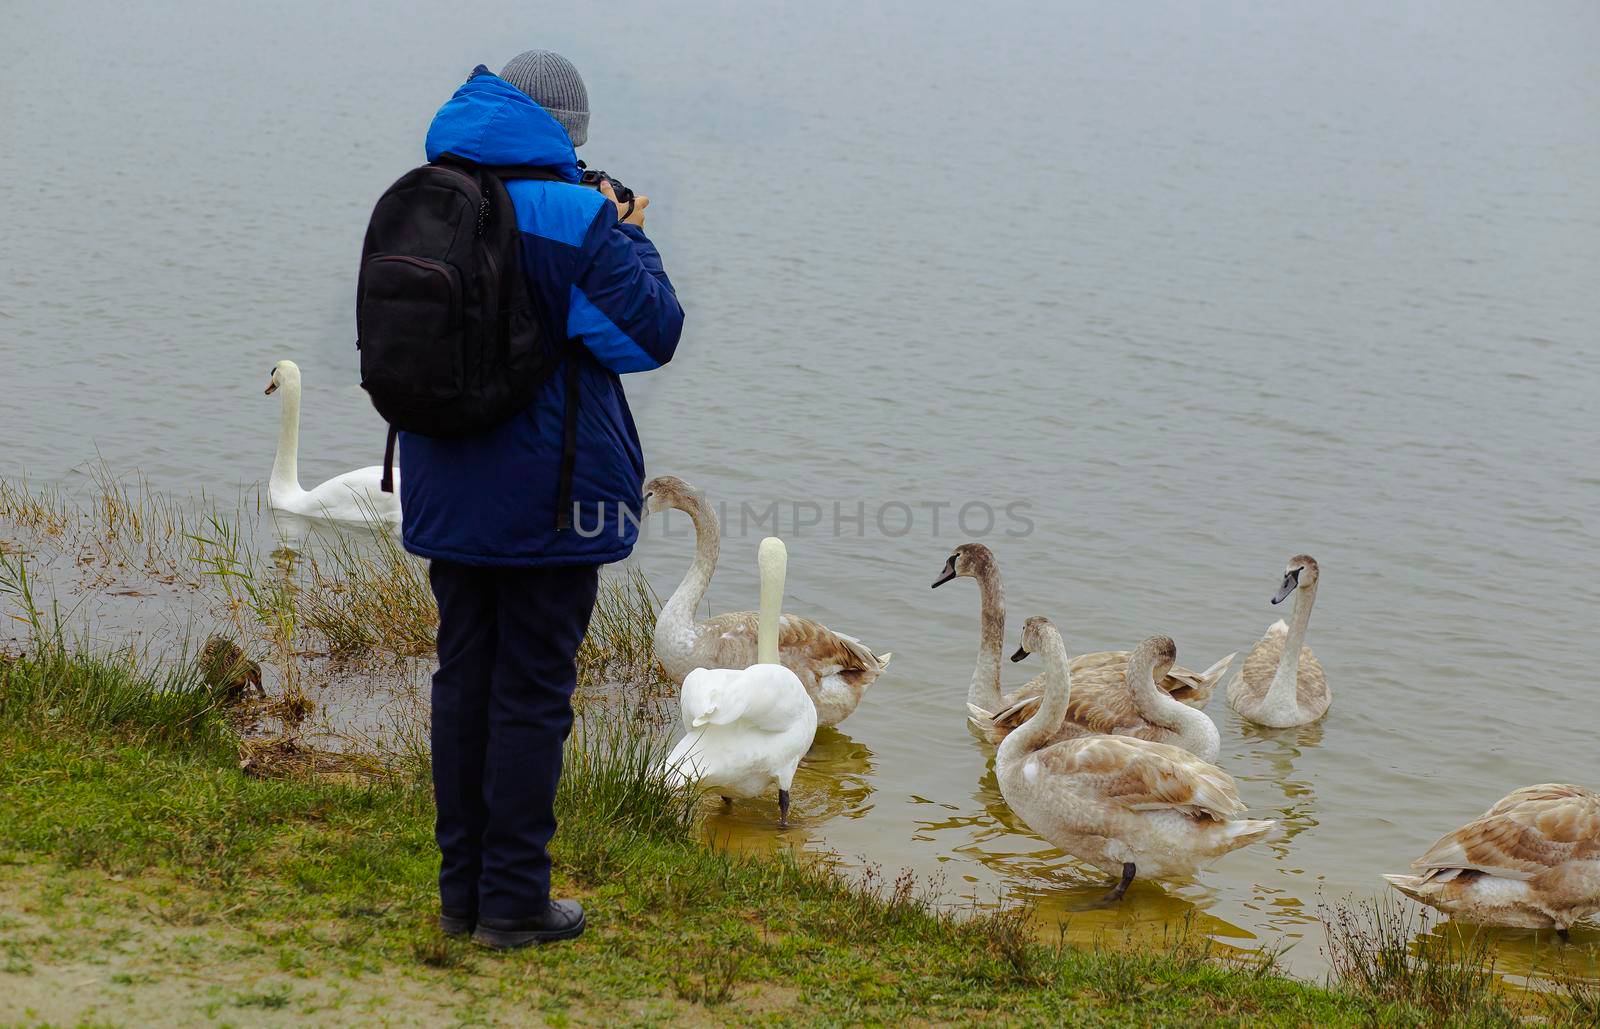 A young boy photographs nature in the Park and swans near the water by AliaksandrFilimonau